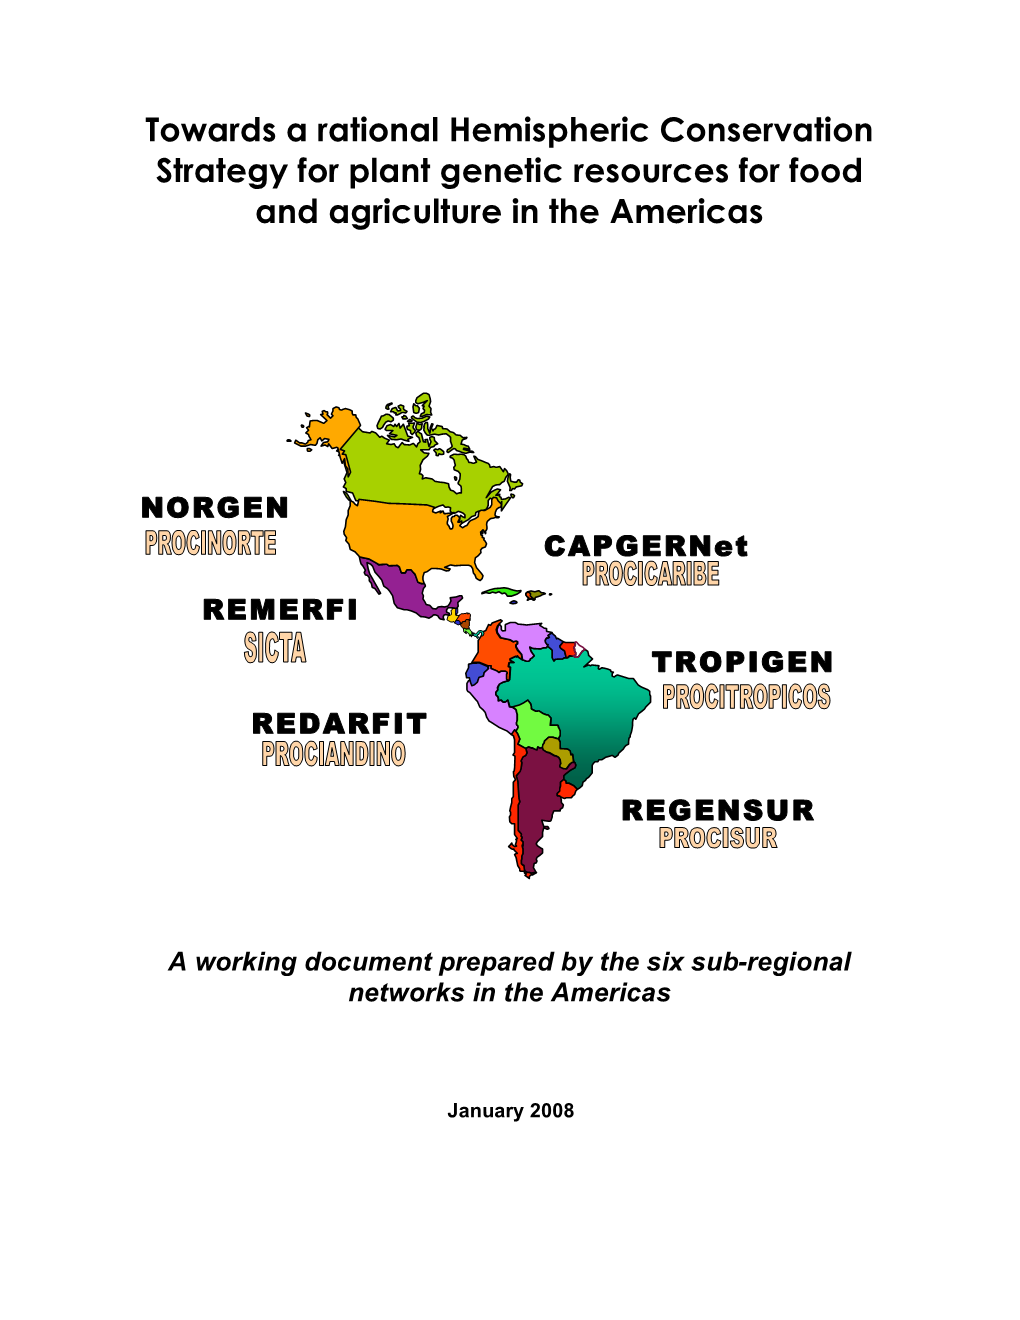 Towards a Rational Hemispheric Conservation Strategy for Plant Genetic Resources for Food and Agriculture in the Americas